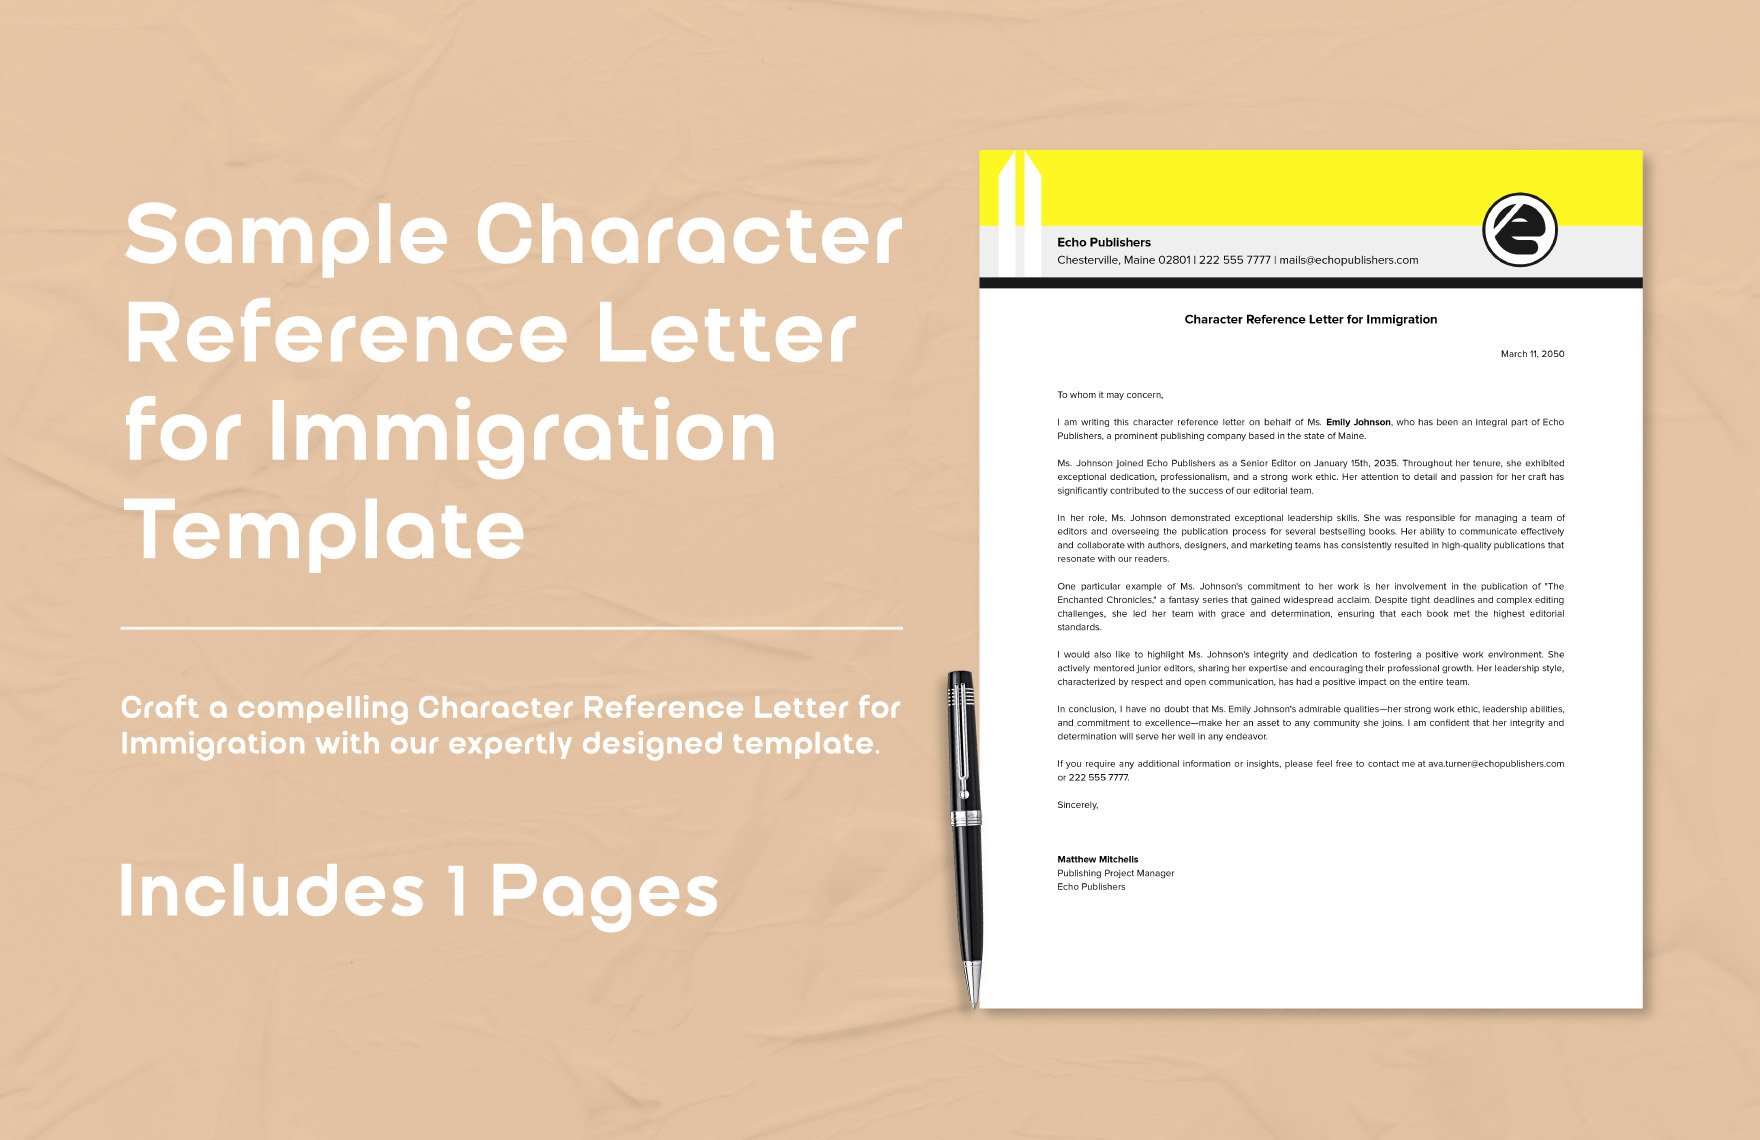 Sample Character Reference Letter for Immigration Template